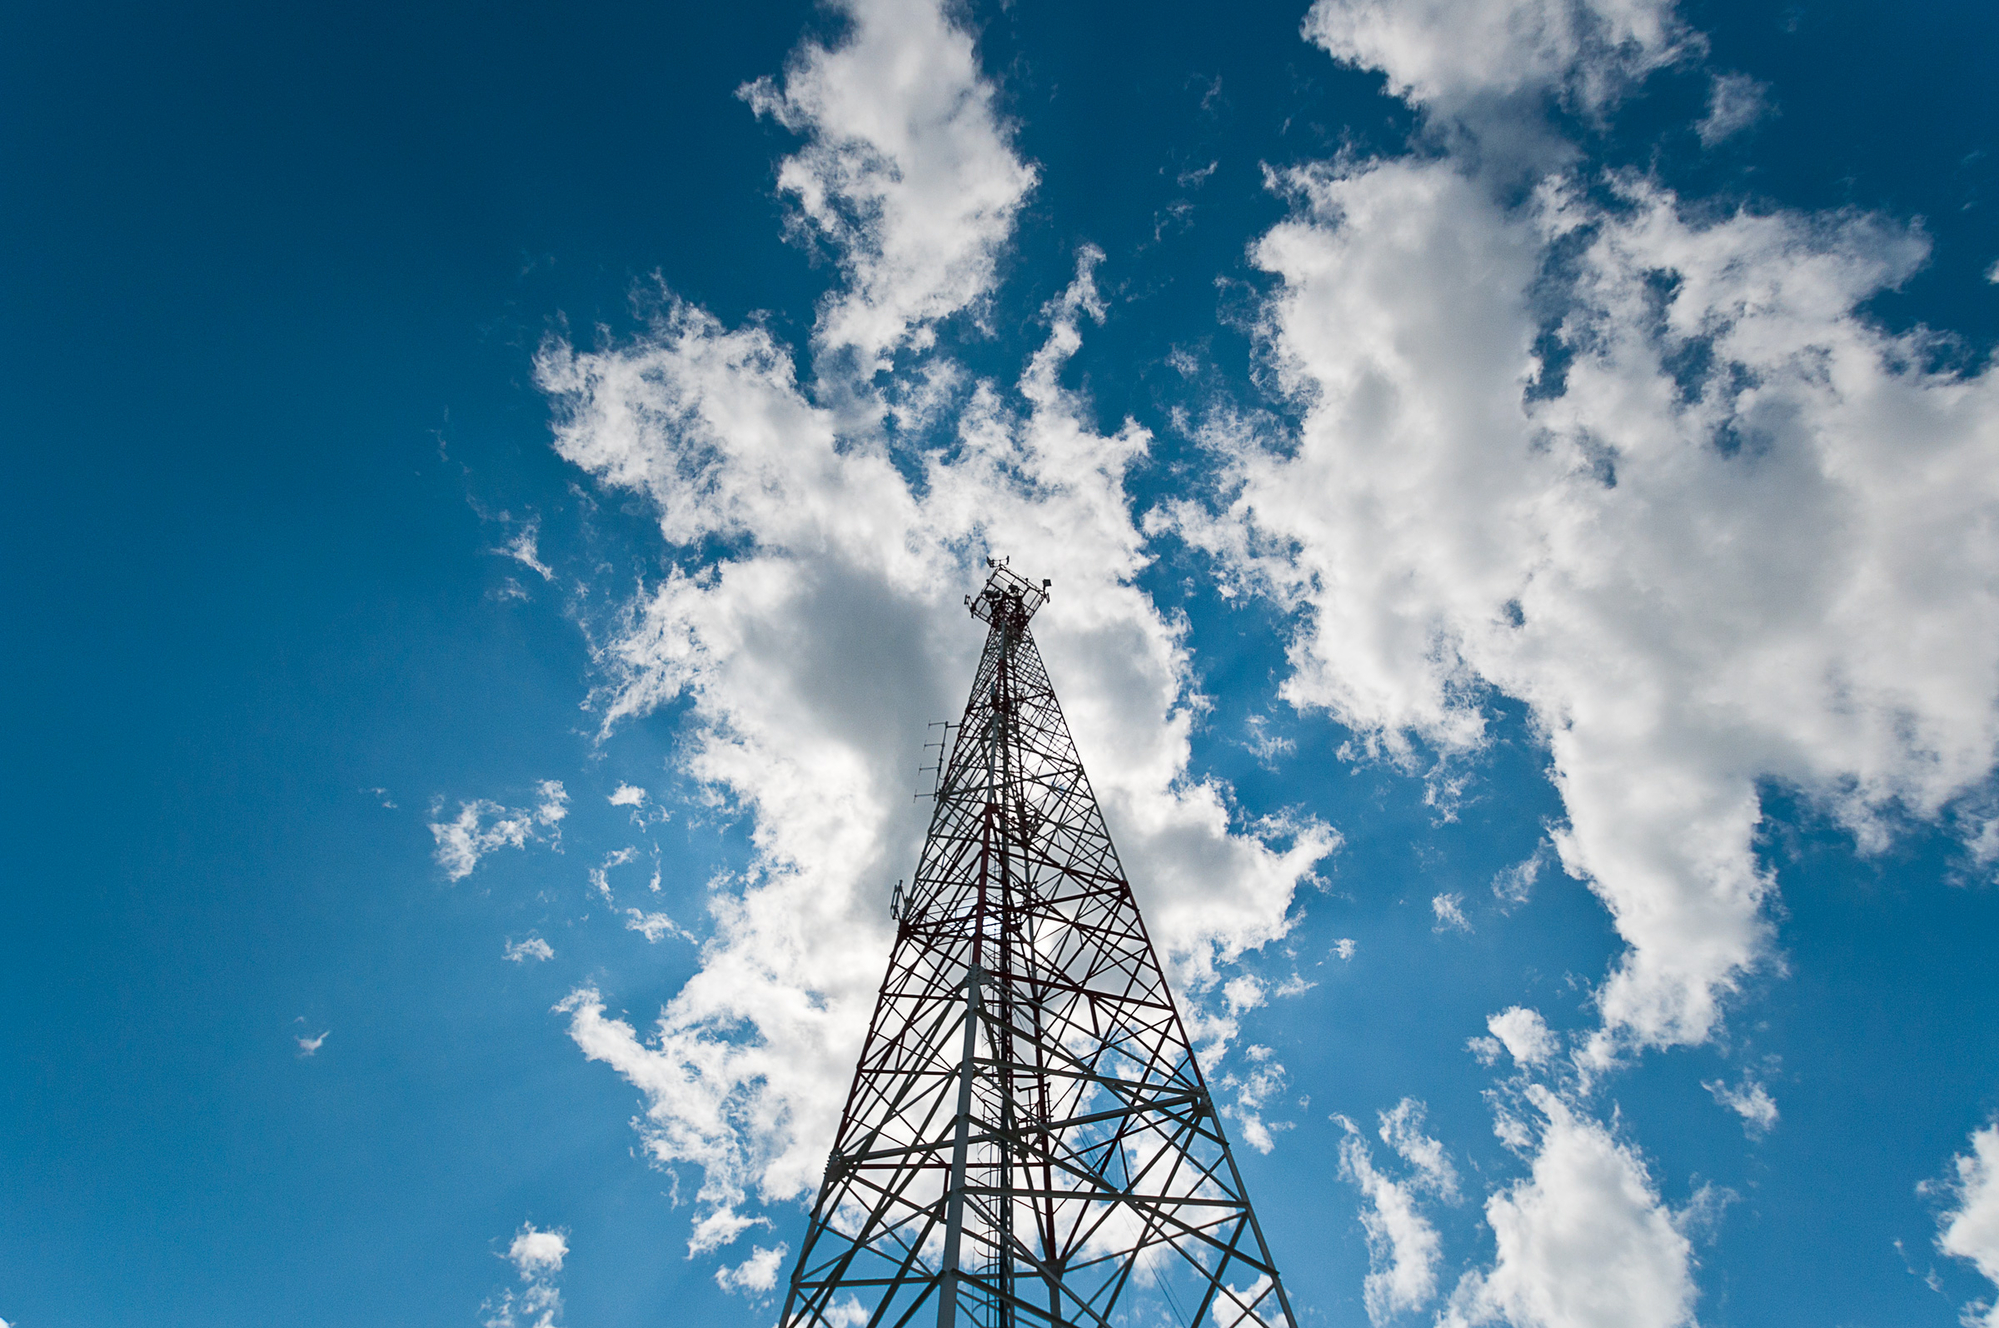 Cell phone tower against blue sky and fluffy clouds